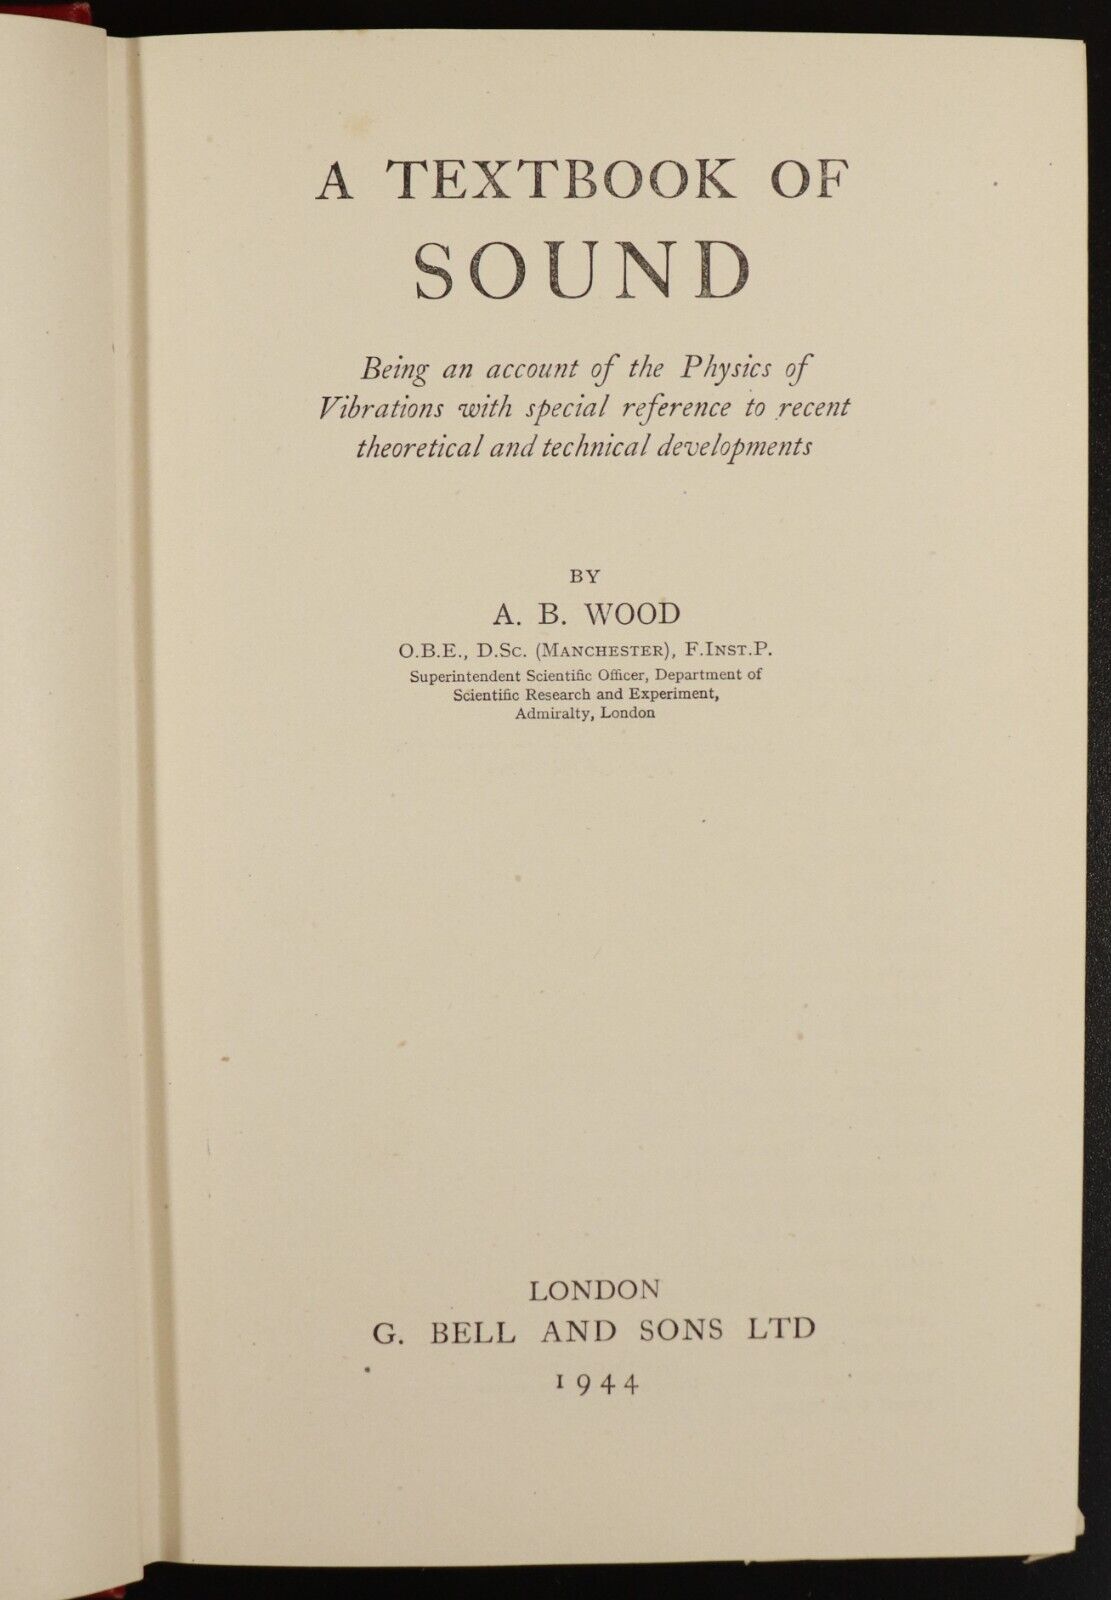 1944 A Text Book Of Sound by A.B. Wood Antique Science Sound Physics Book - 0